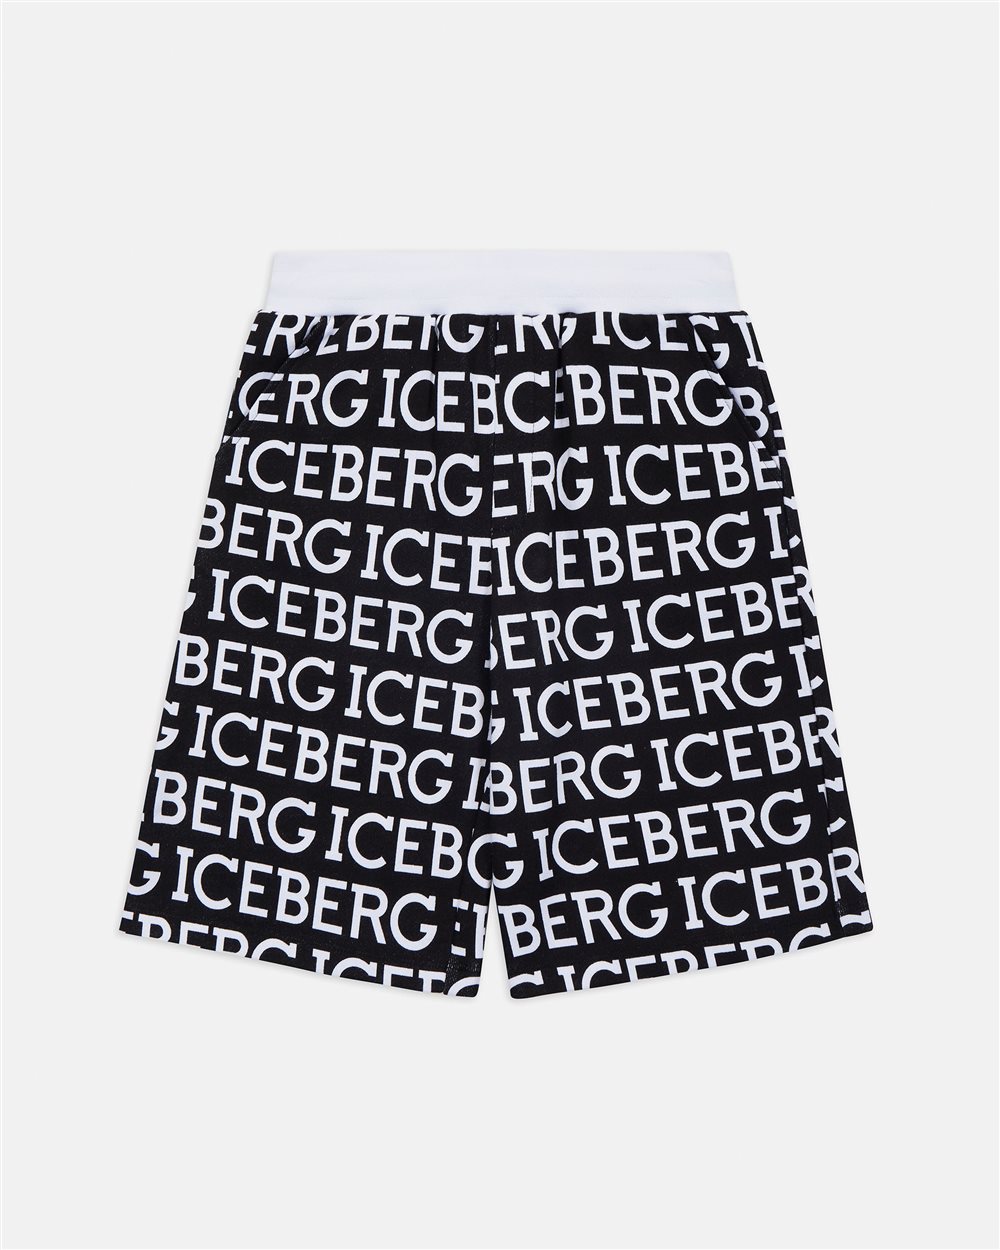 Shorts with logo - Iceberg - Official Website